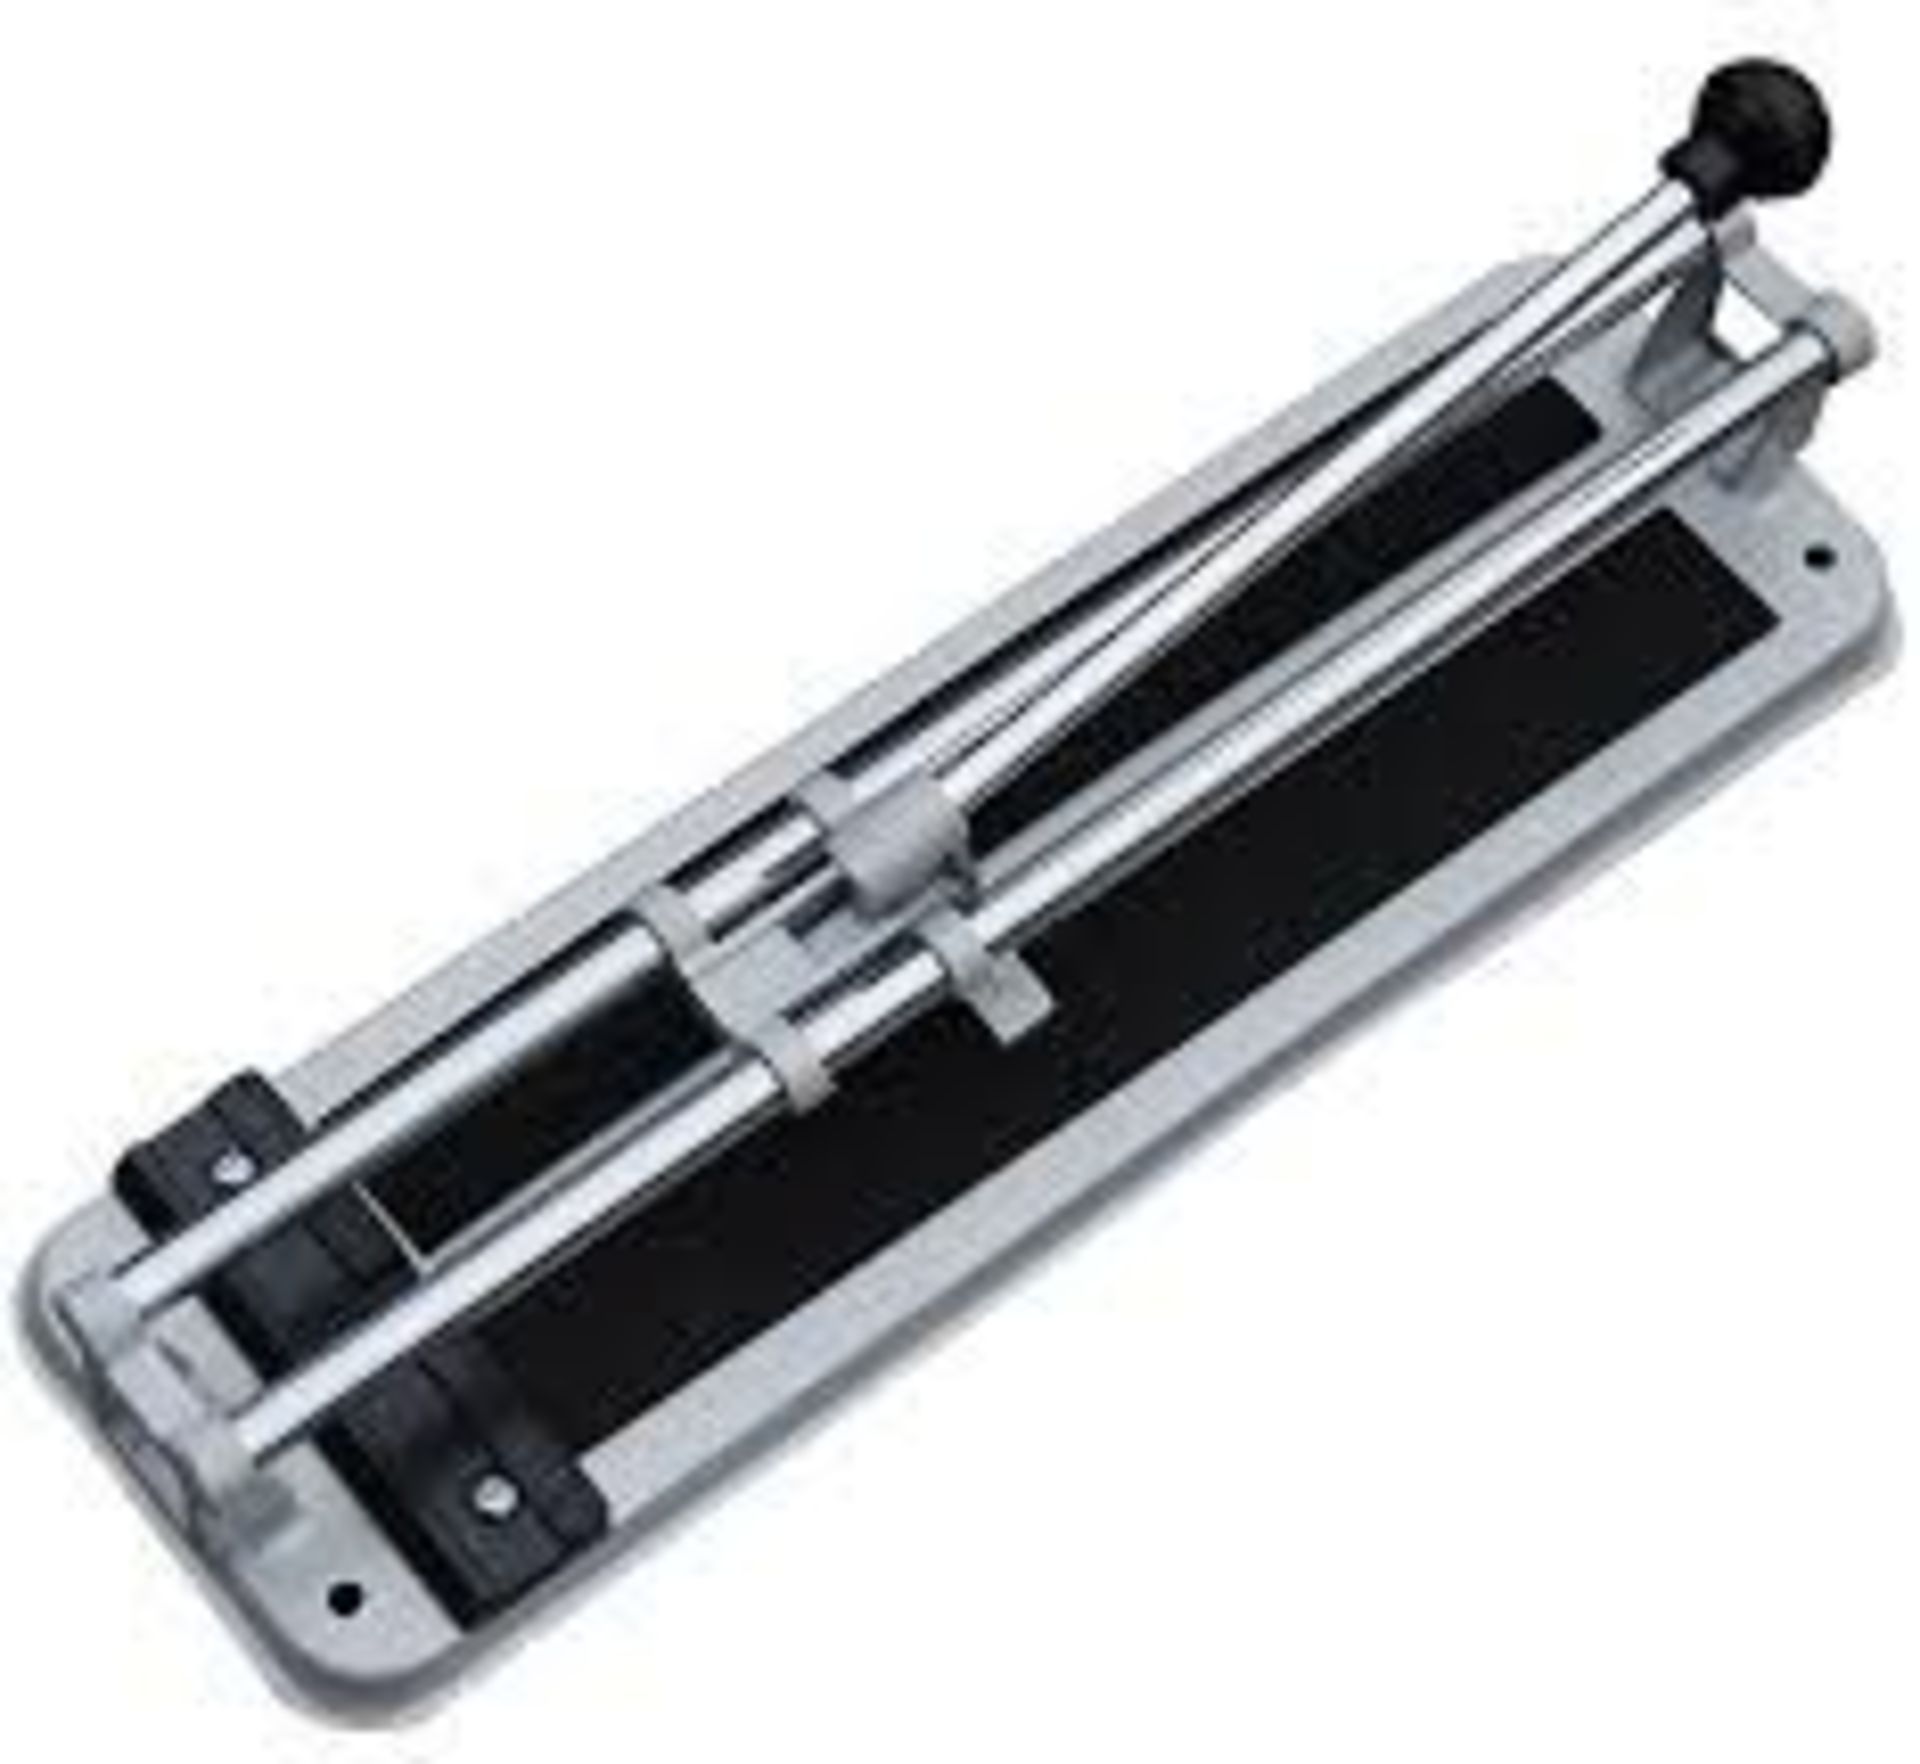 330mm Manual Tile cutter. - R14.14. This Light duty 330mm tungsten carbide tile cutter with it's